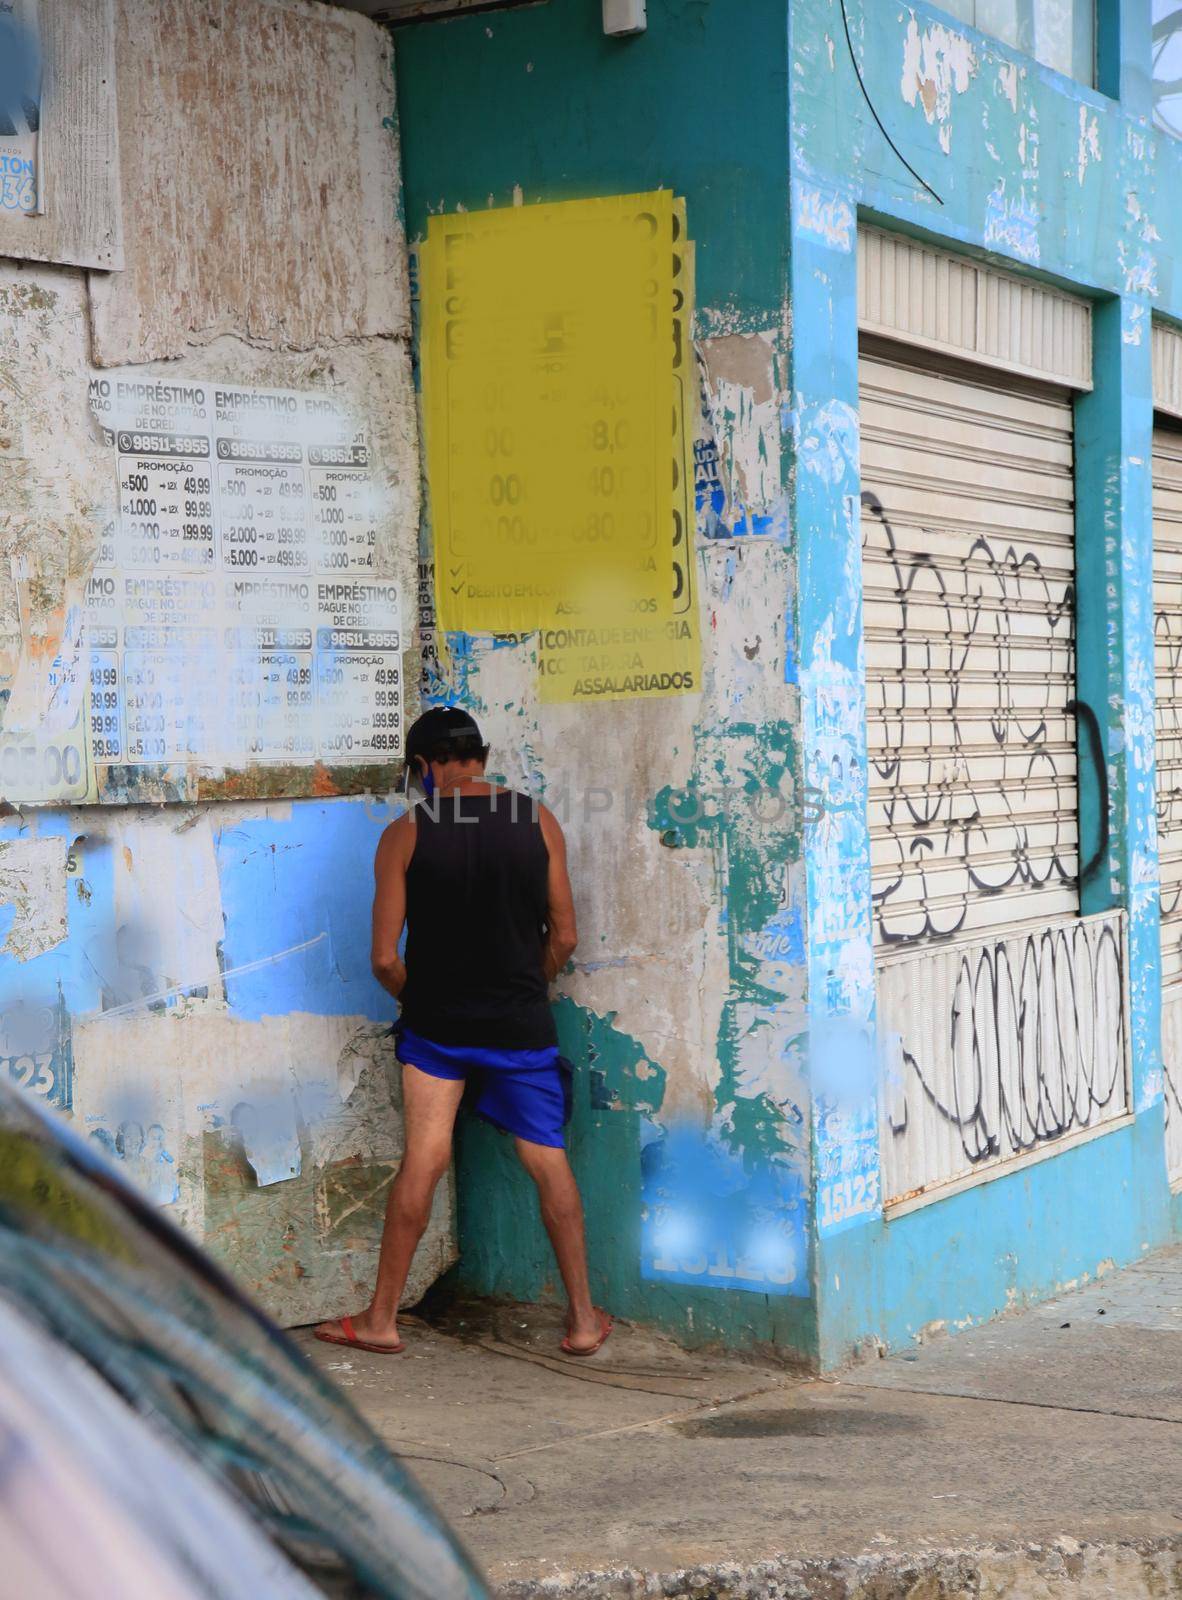 
person urinating in the street in salvador
 by joasouza